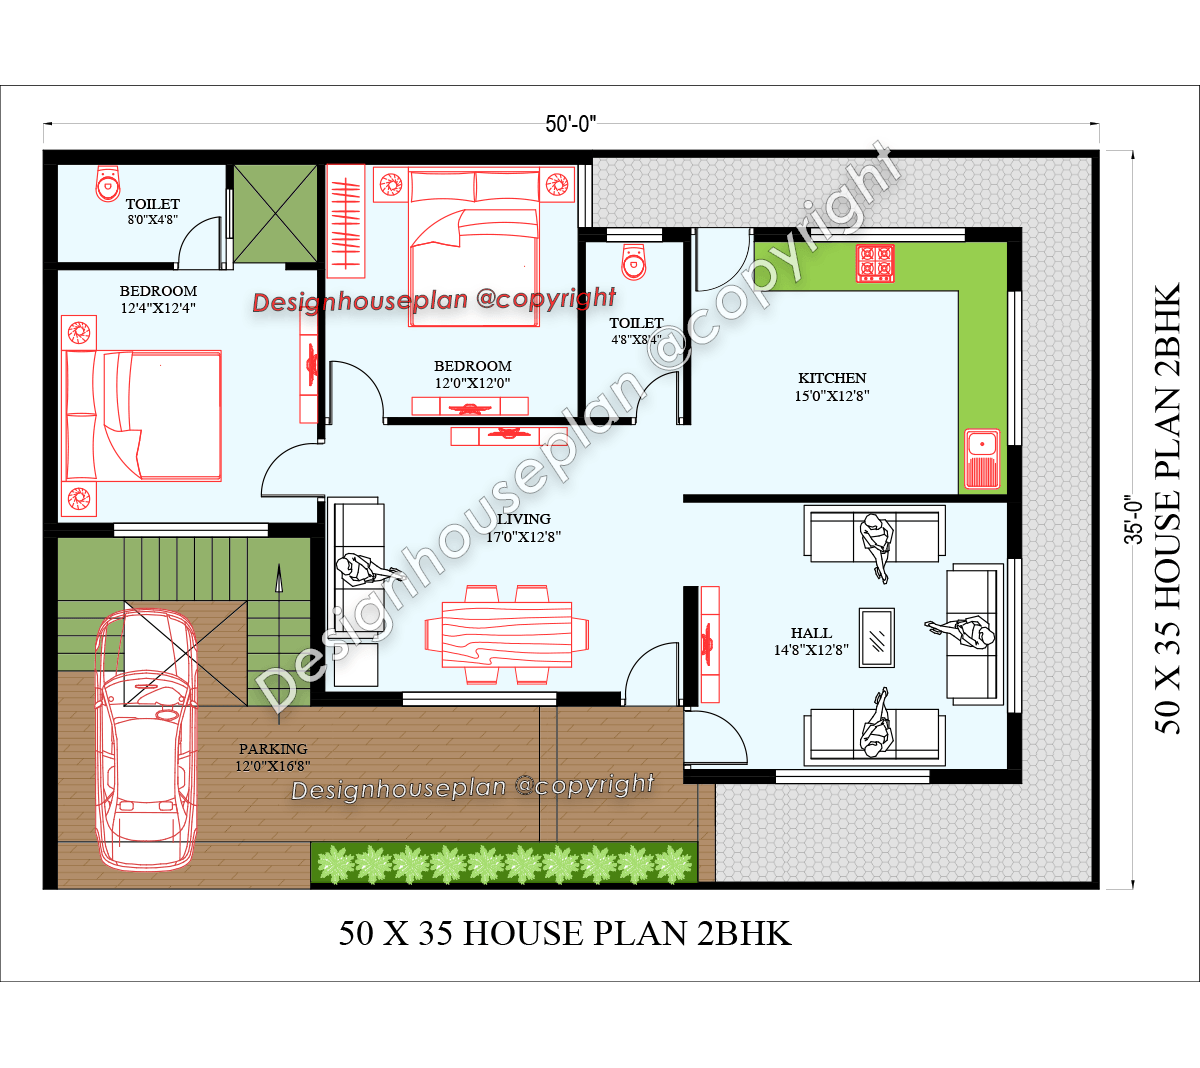 50X35 affordable house design